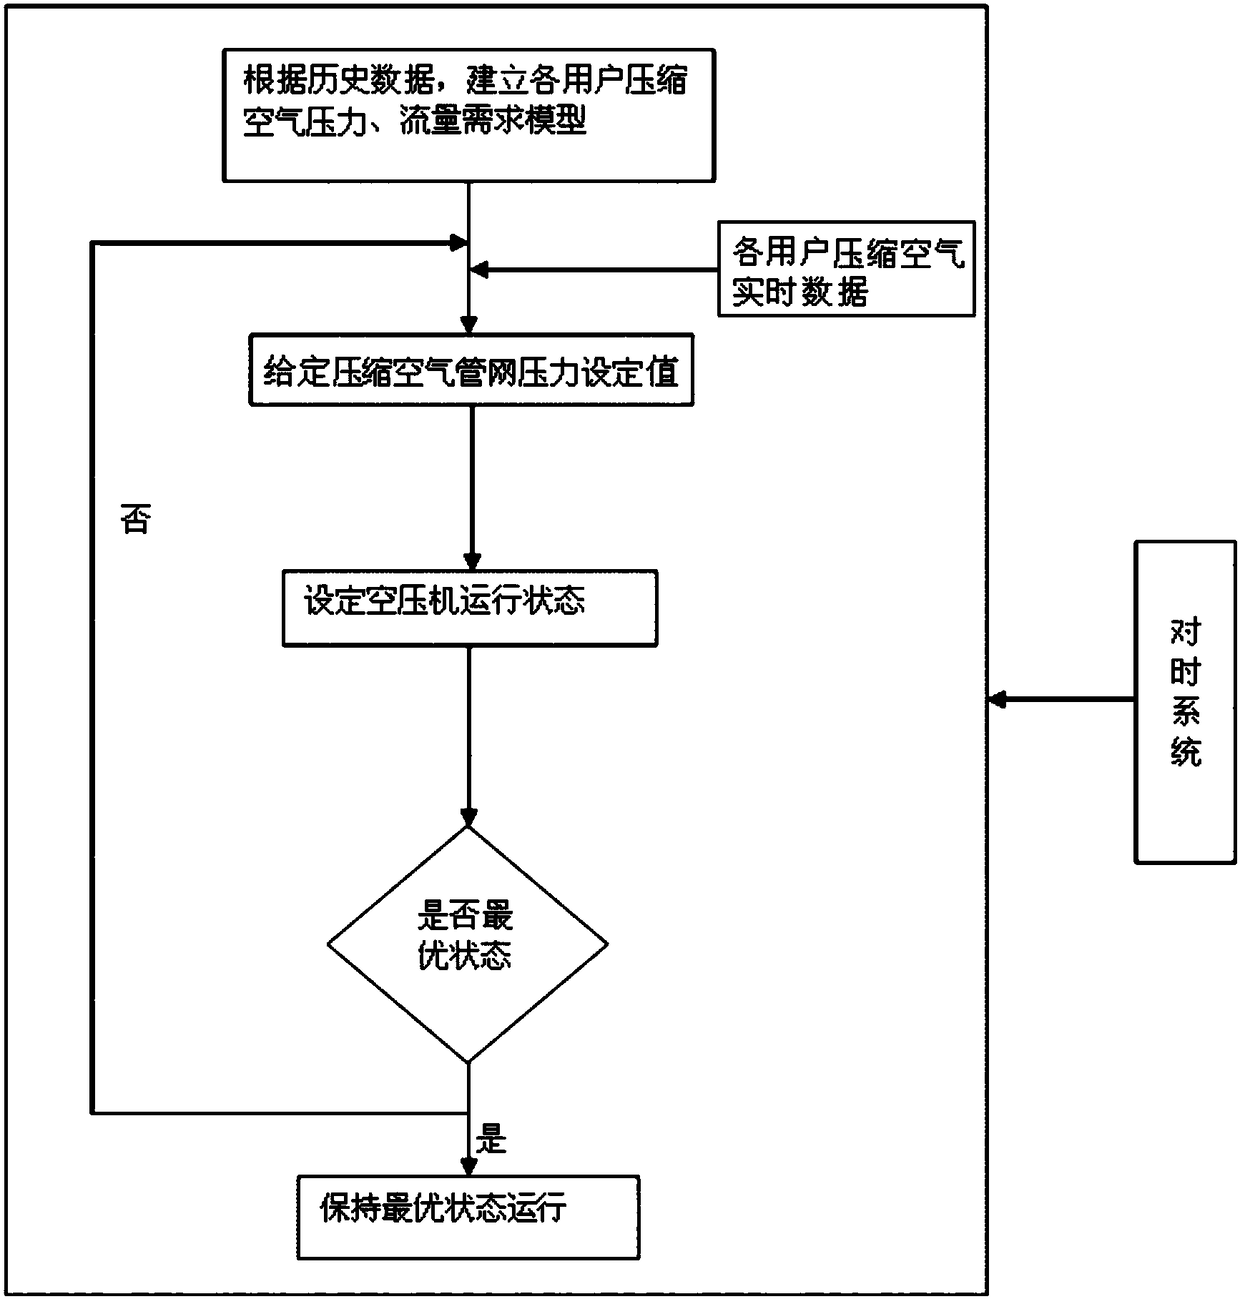 Optimization method for air compressor system of iron and steel plant